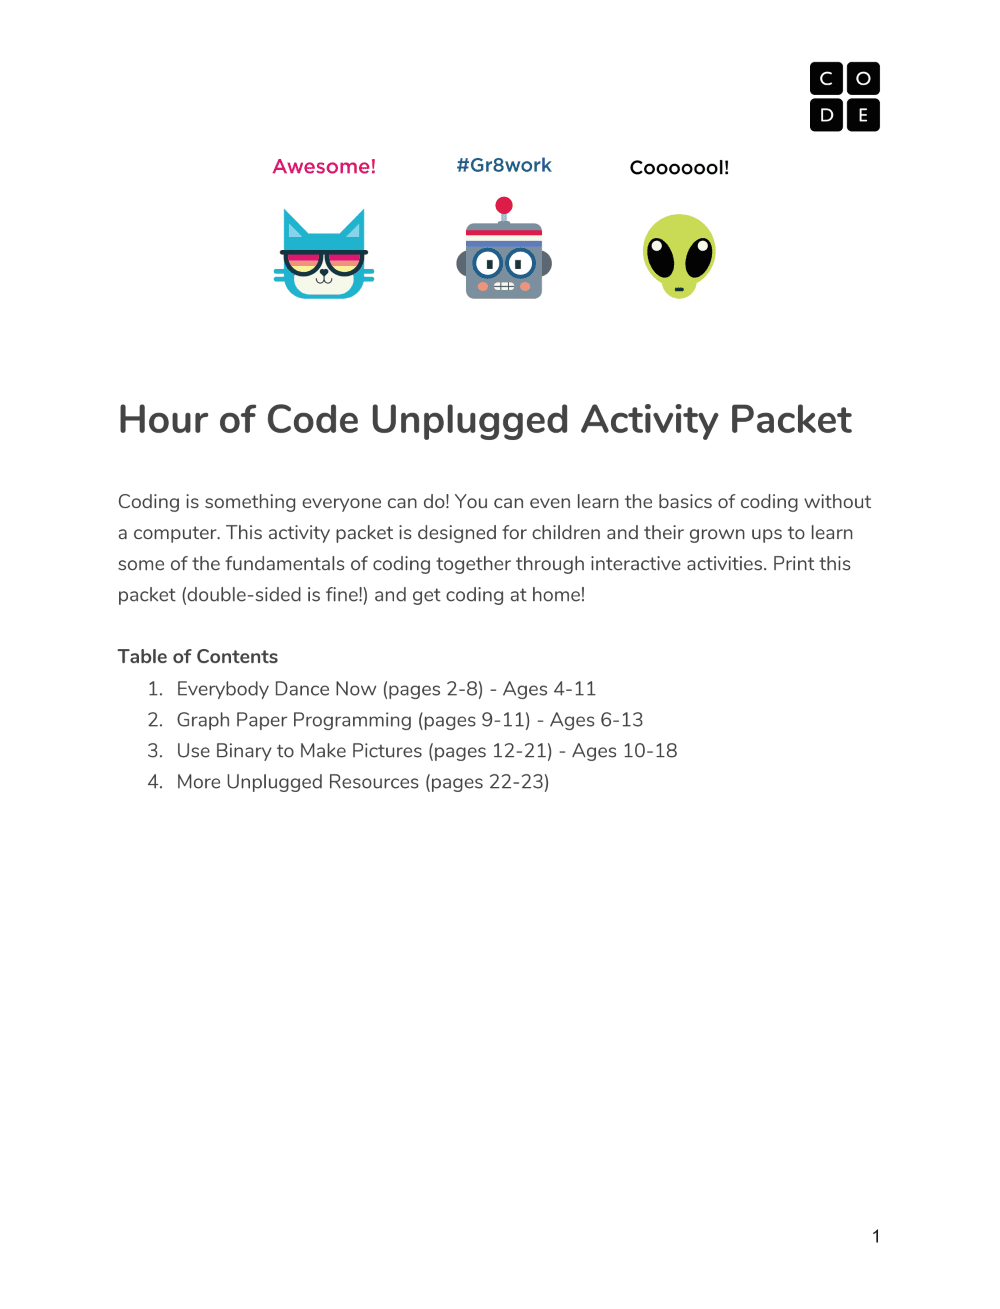 Unplugged activities for Hour of Code